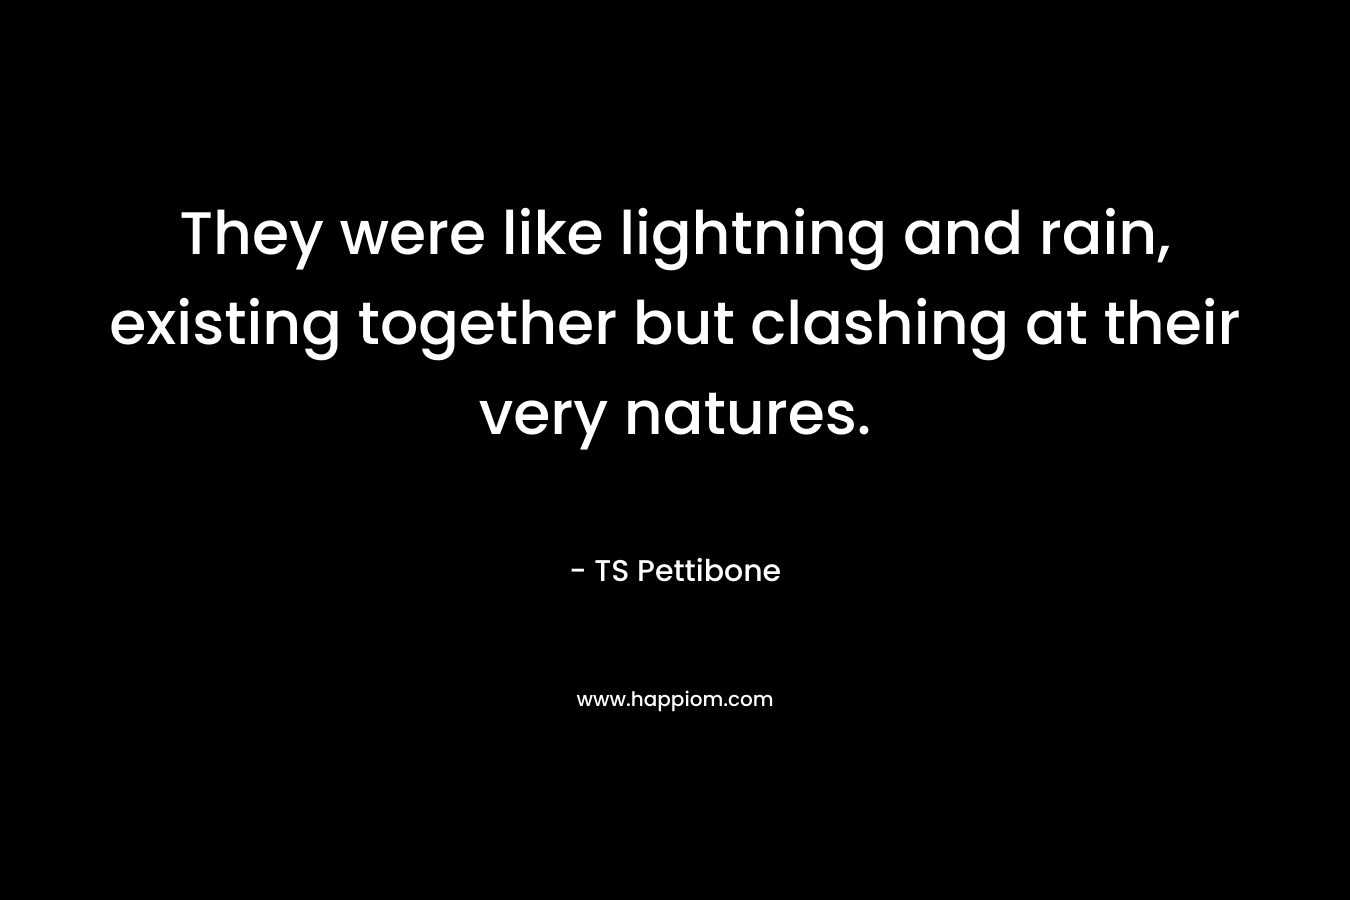 They were like lightning and rain, existing together but clashing at their very natures. – TS Pettibone